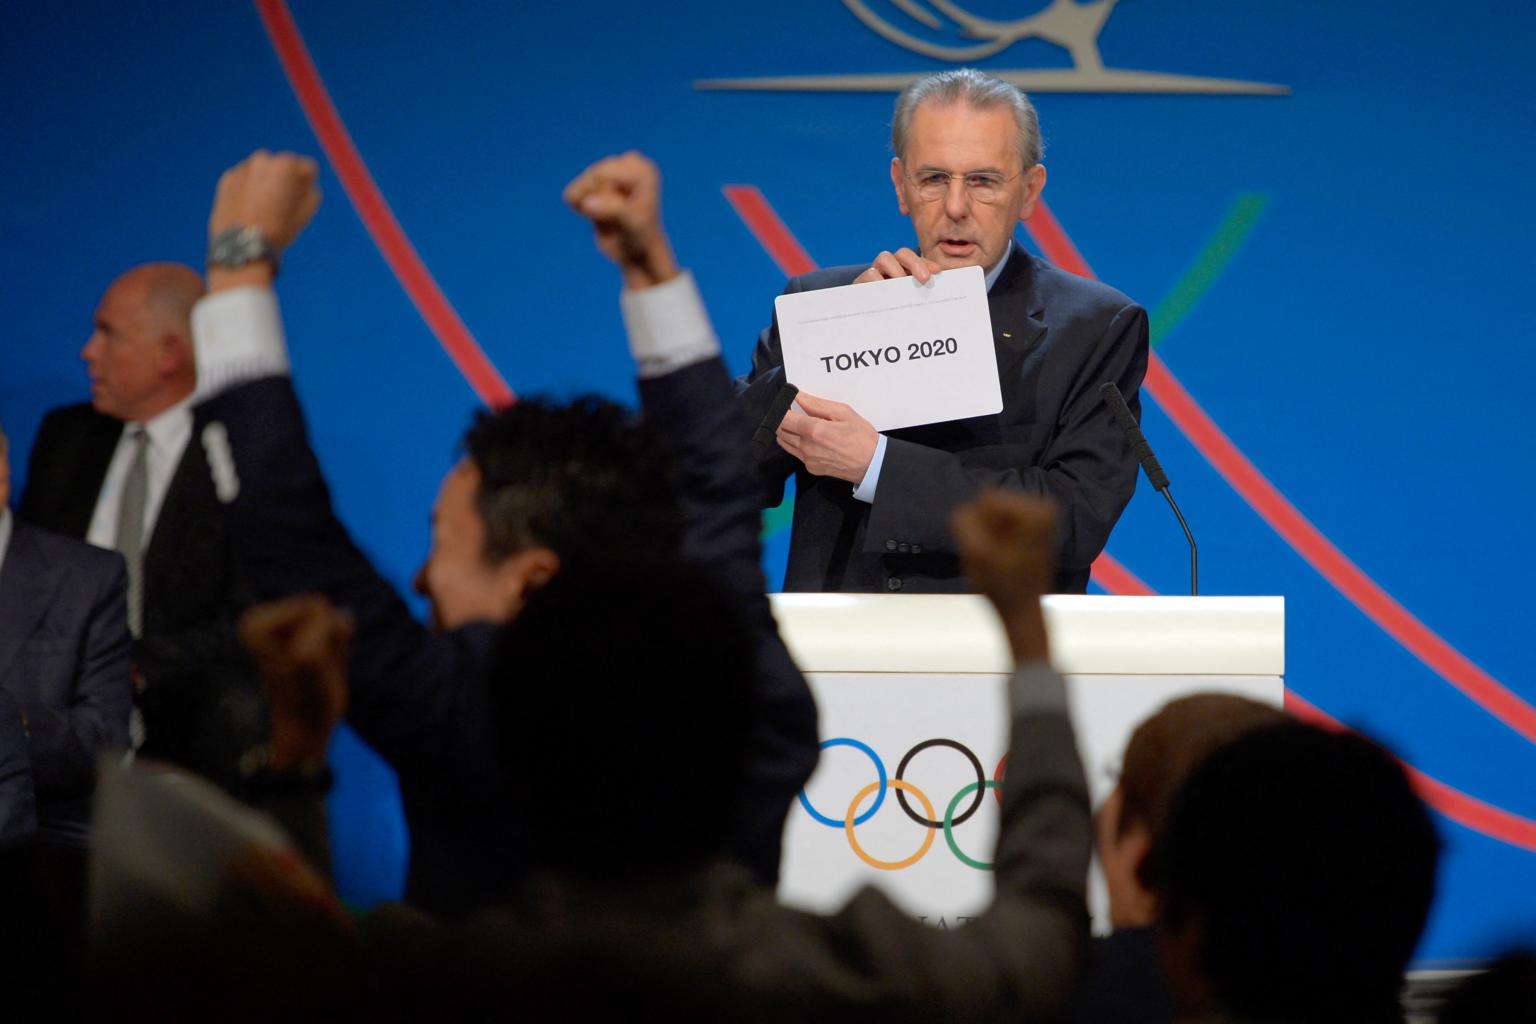 Obituary: Jacques Rogge, the International Olympic Committee's 'Mr Normal'